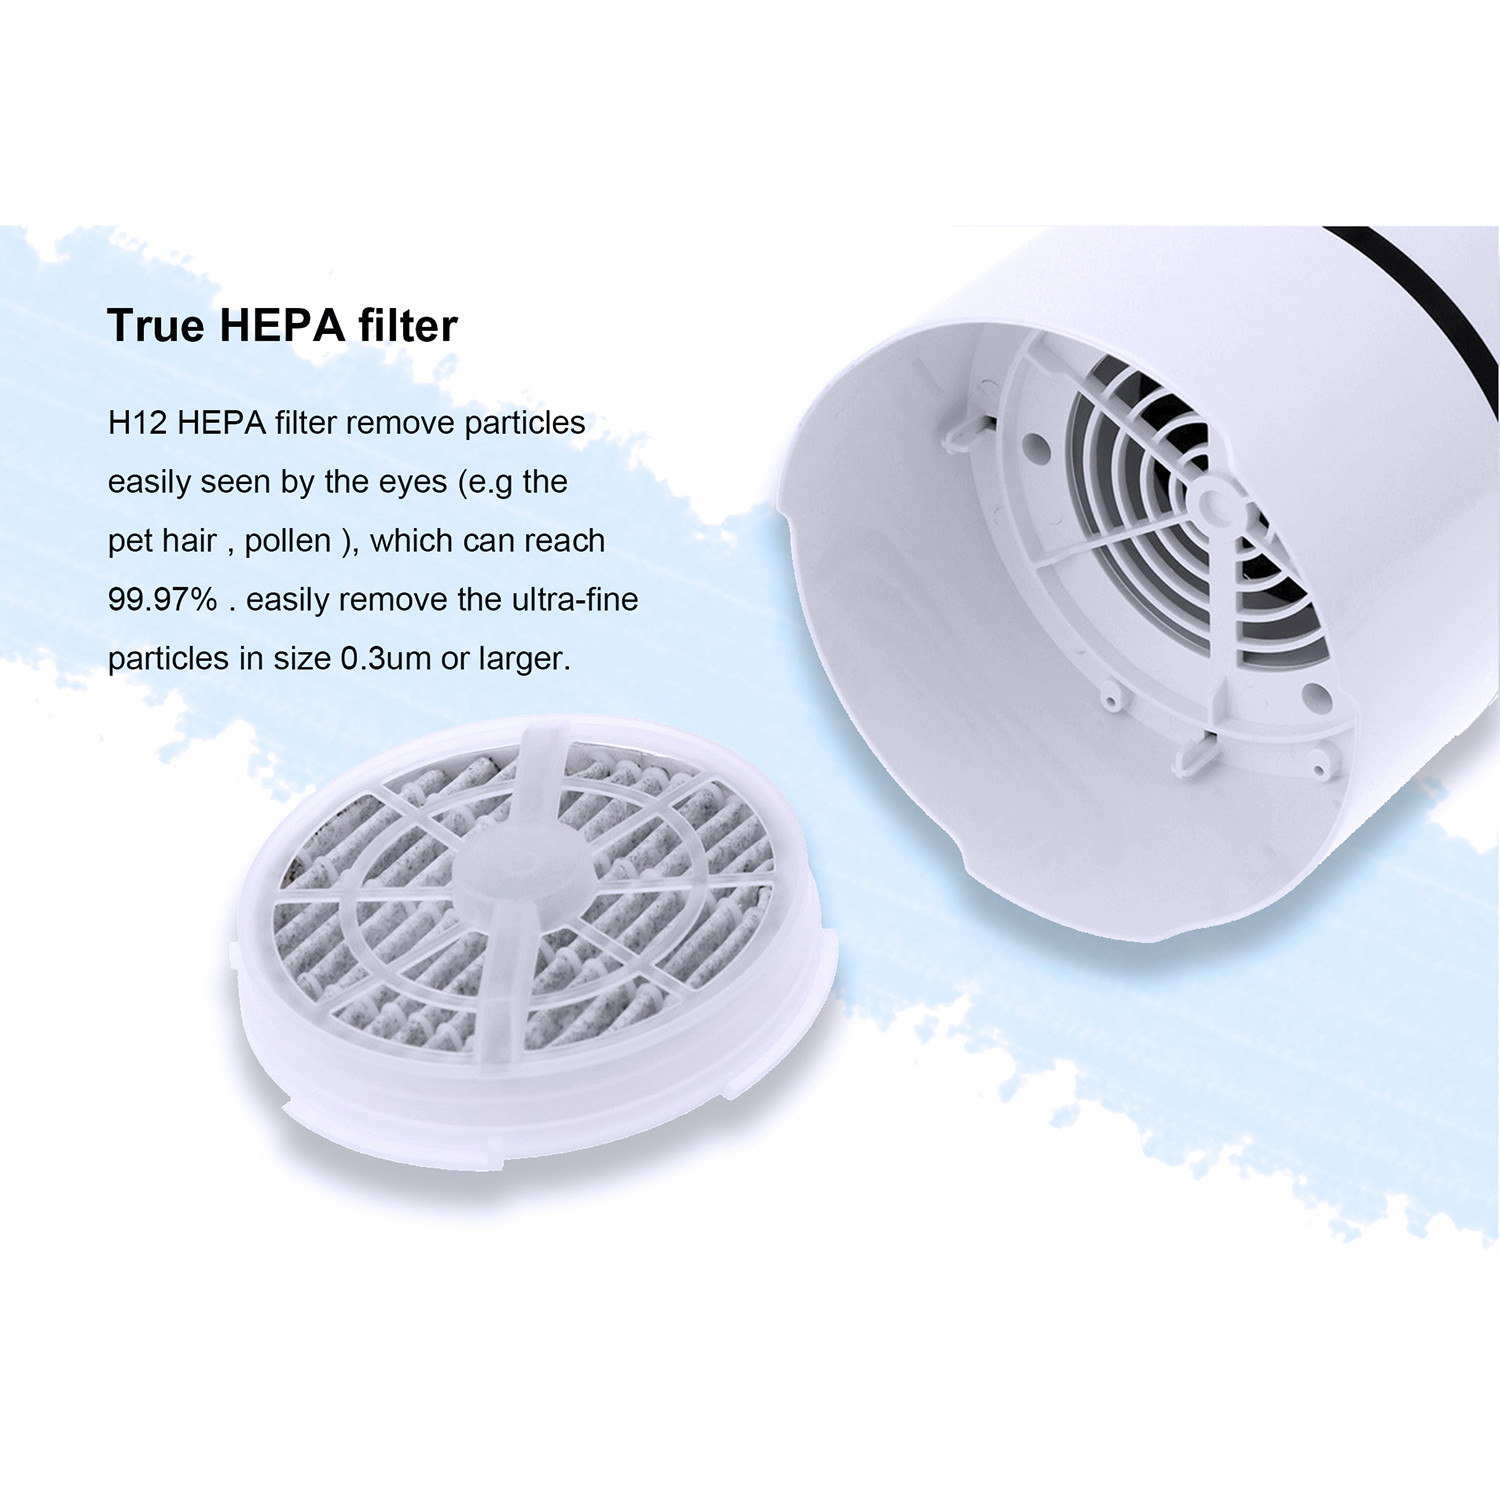 GL-203 White HEPA Filter Air Purifier Image 2